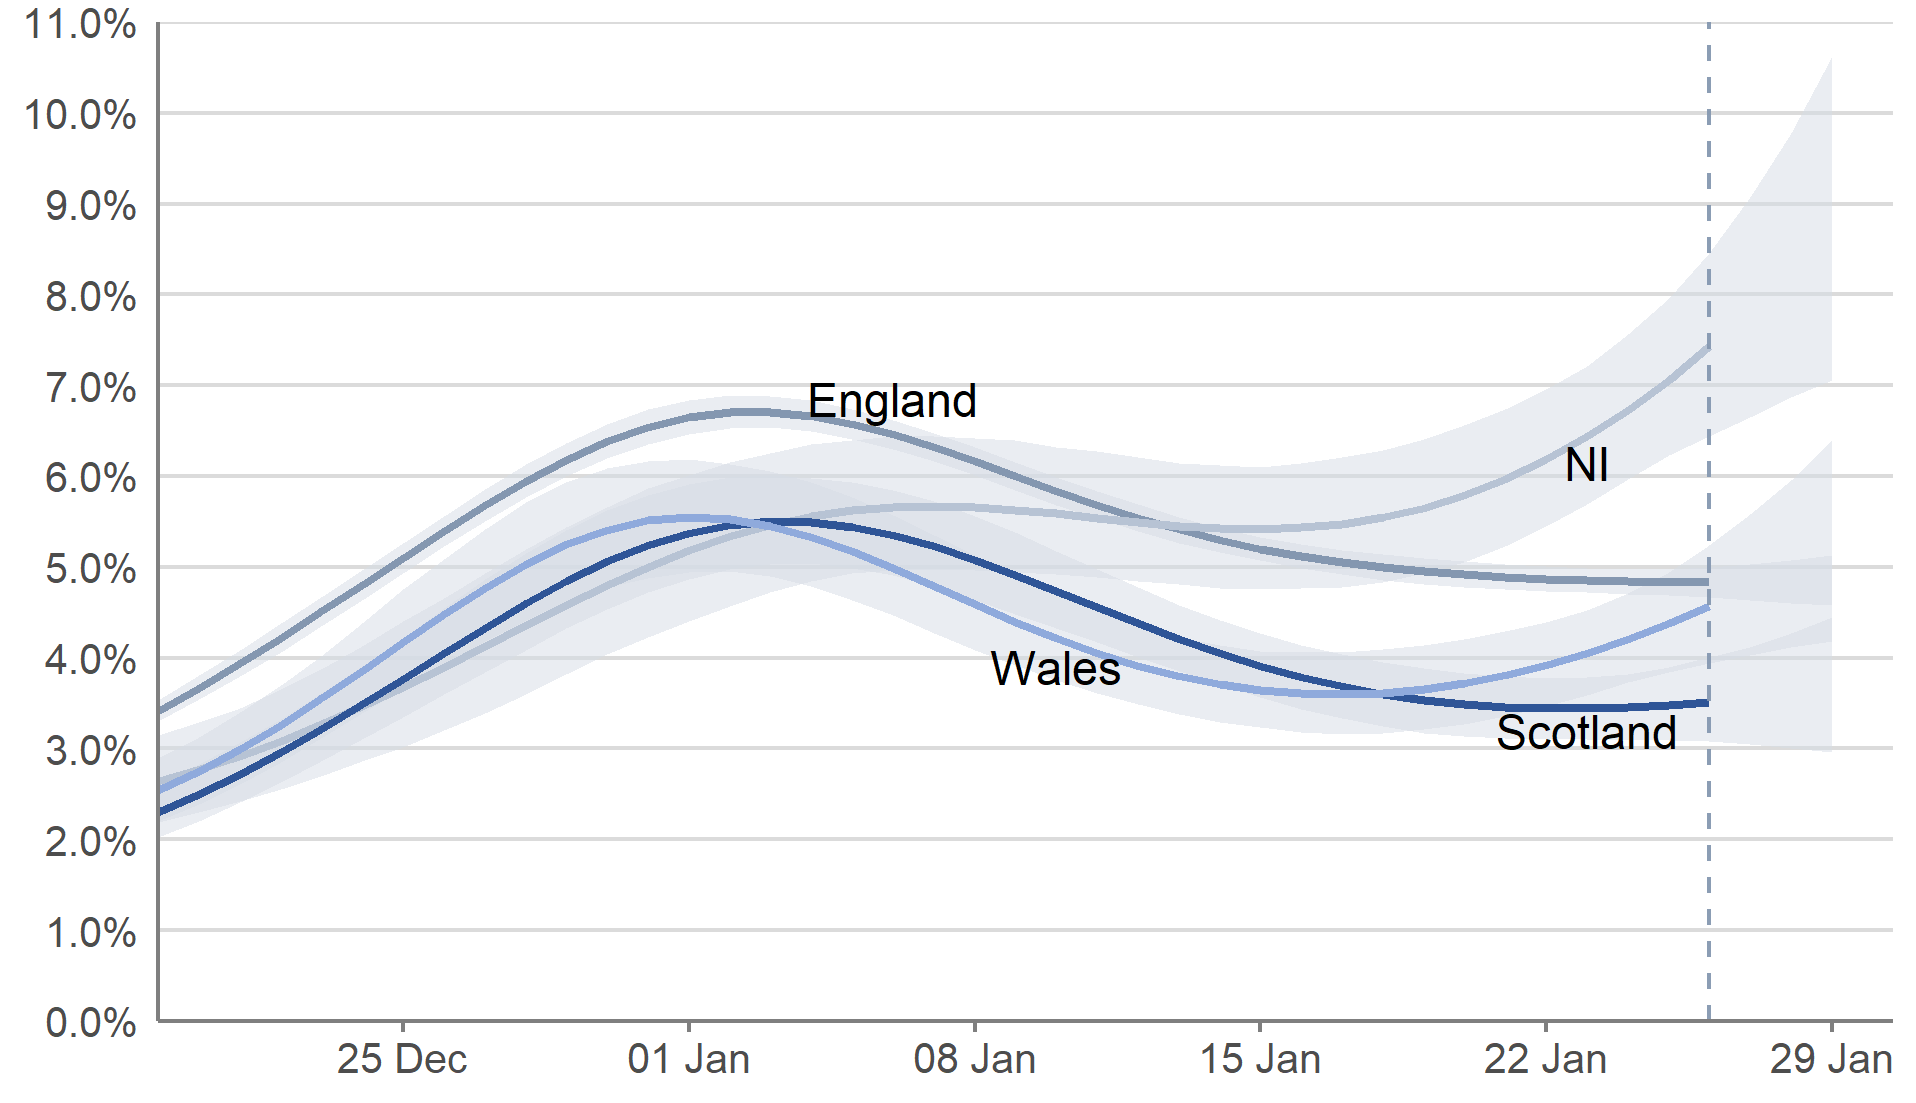 In England, the percentage of people testing positive for COVID-19 remained high in the most recent week (23 to 29 January 2022). In Wales and Northern Ireland, the percentage of people testing positive increased in the most recent week. In Scotland, the percentage of people testing positive for COVID-19 decreased in the two weeks up to 29 January 2022, but the trend was uncertain in the most recent week.